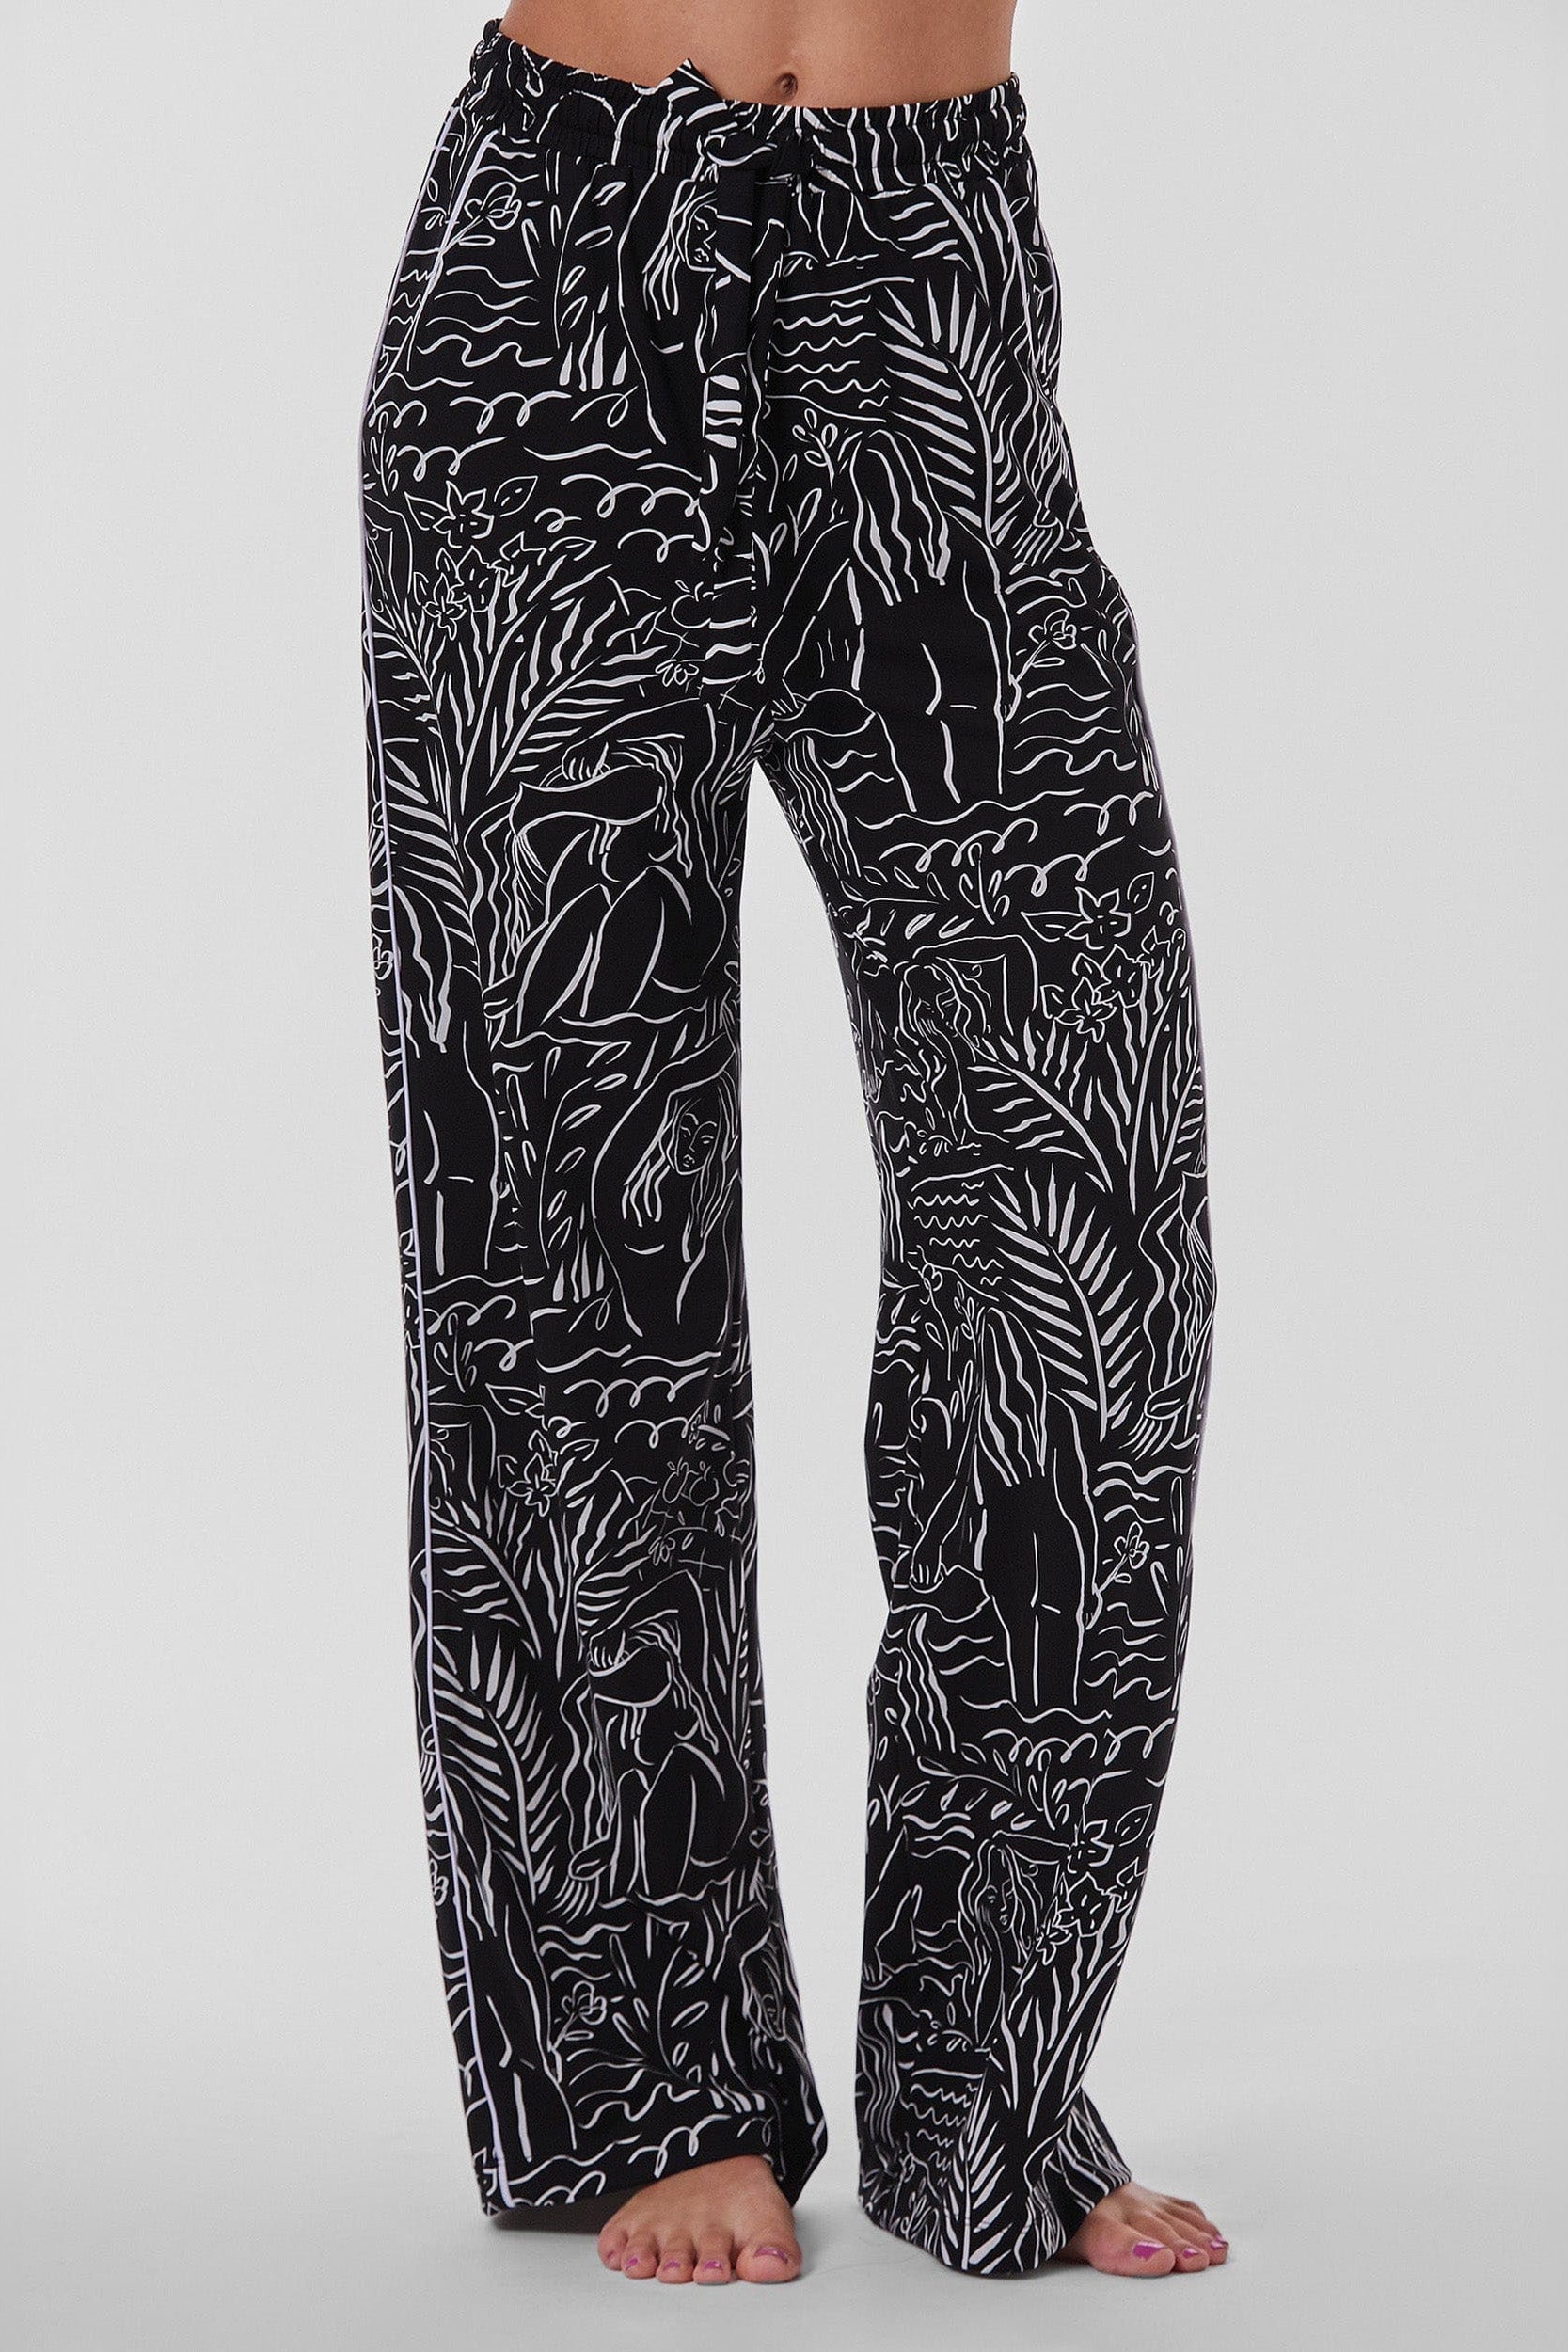 A person is shown from the waist down, barefoot on a plain white background, wearing the Venus Pajama Soft Long Pant. These high-waisted, flowy pants feature an abstract jungle-themed pattern with plants and animals in black and white. The soft material and tied waistband embody a distinct Venus Print allure.